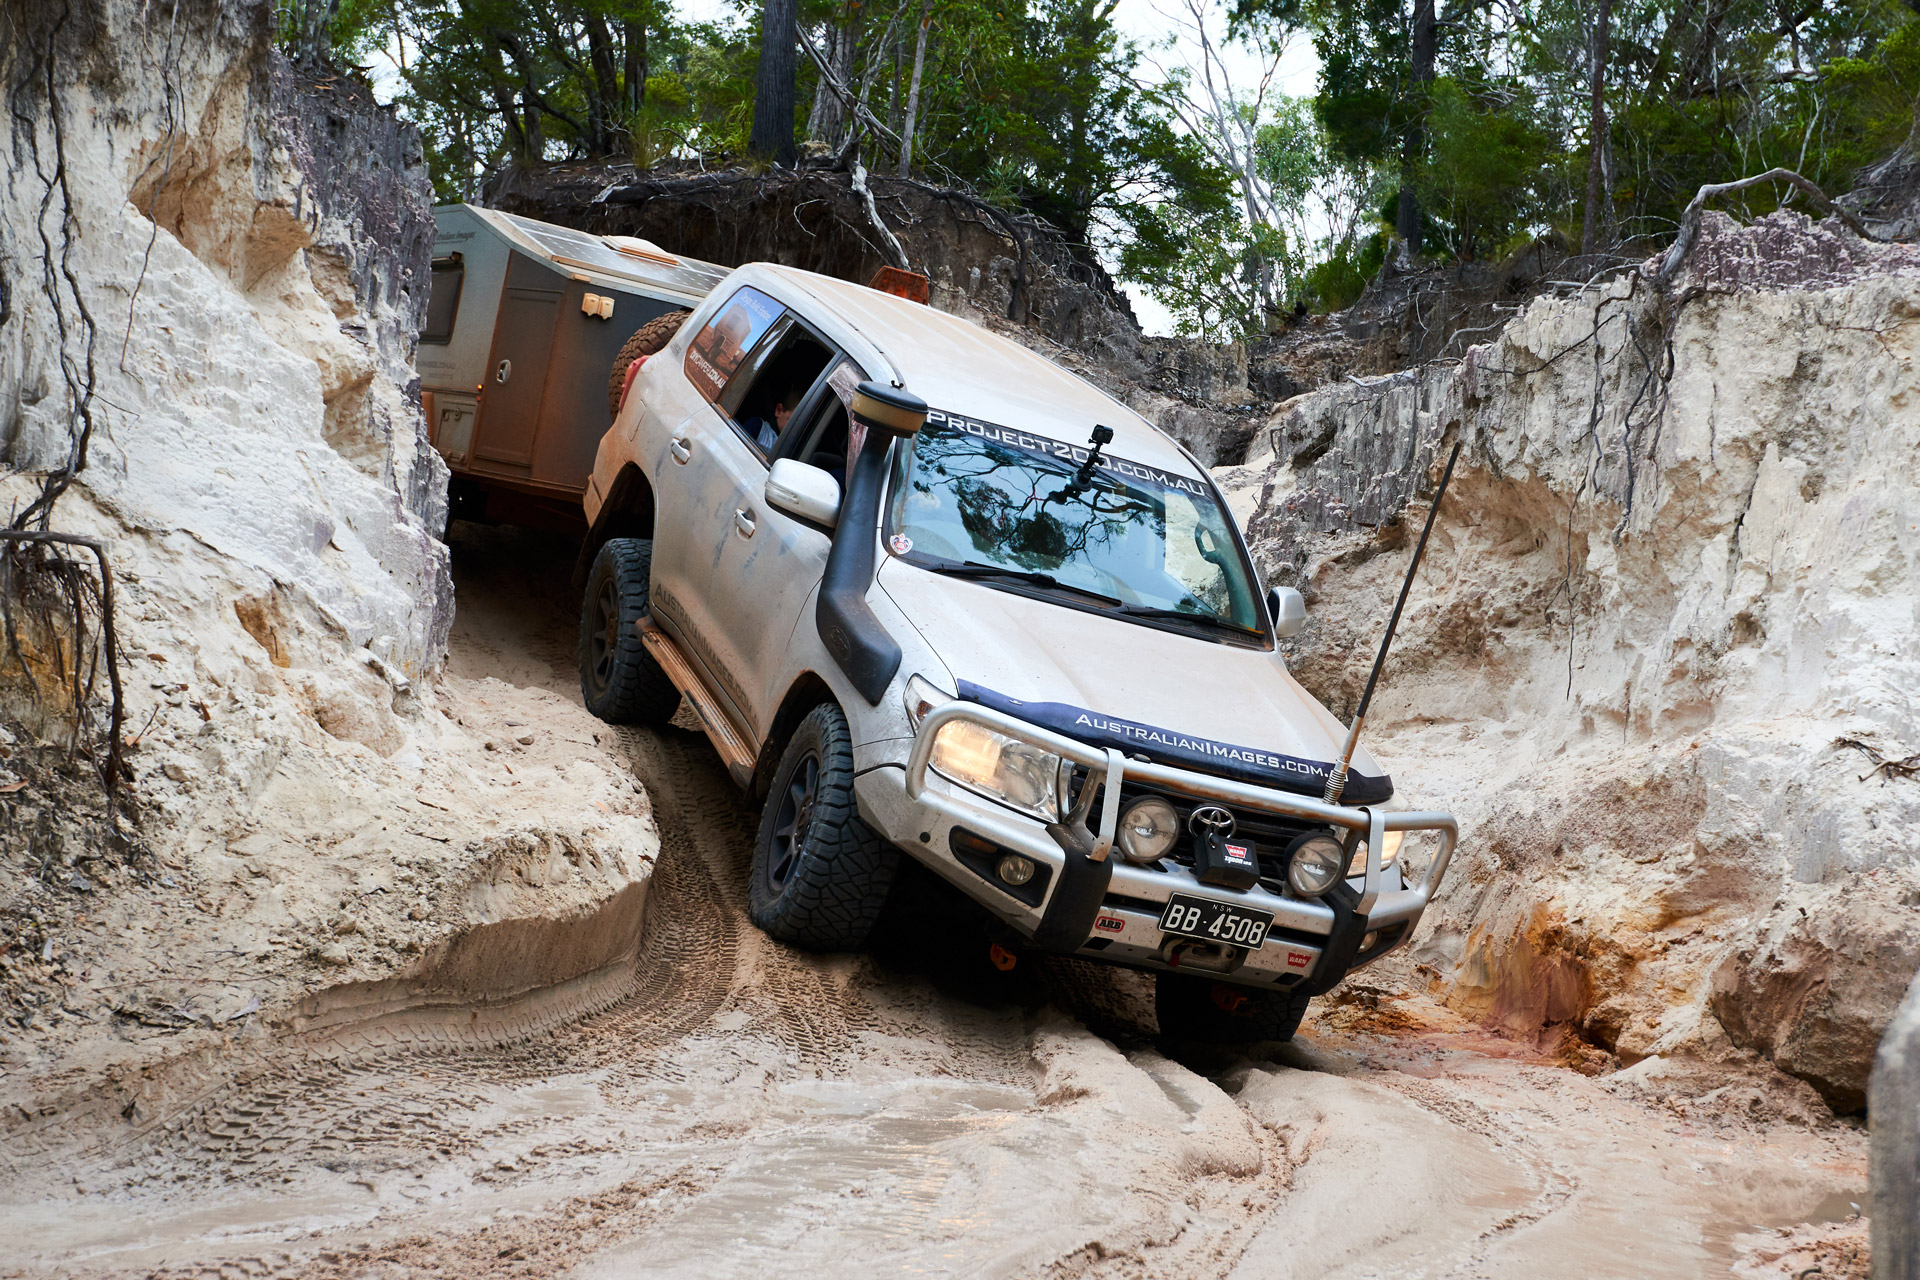 ROH 4x4 Trophy wheels on LC200 Cape York driving from rocks through sandy beach entry